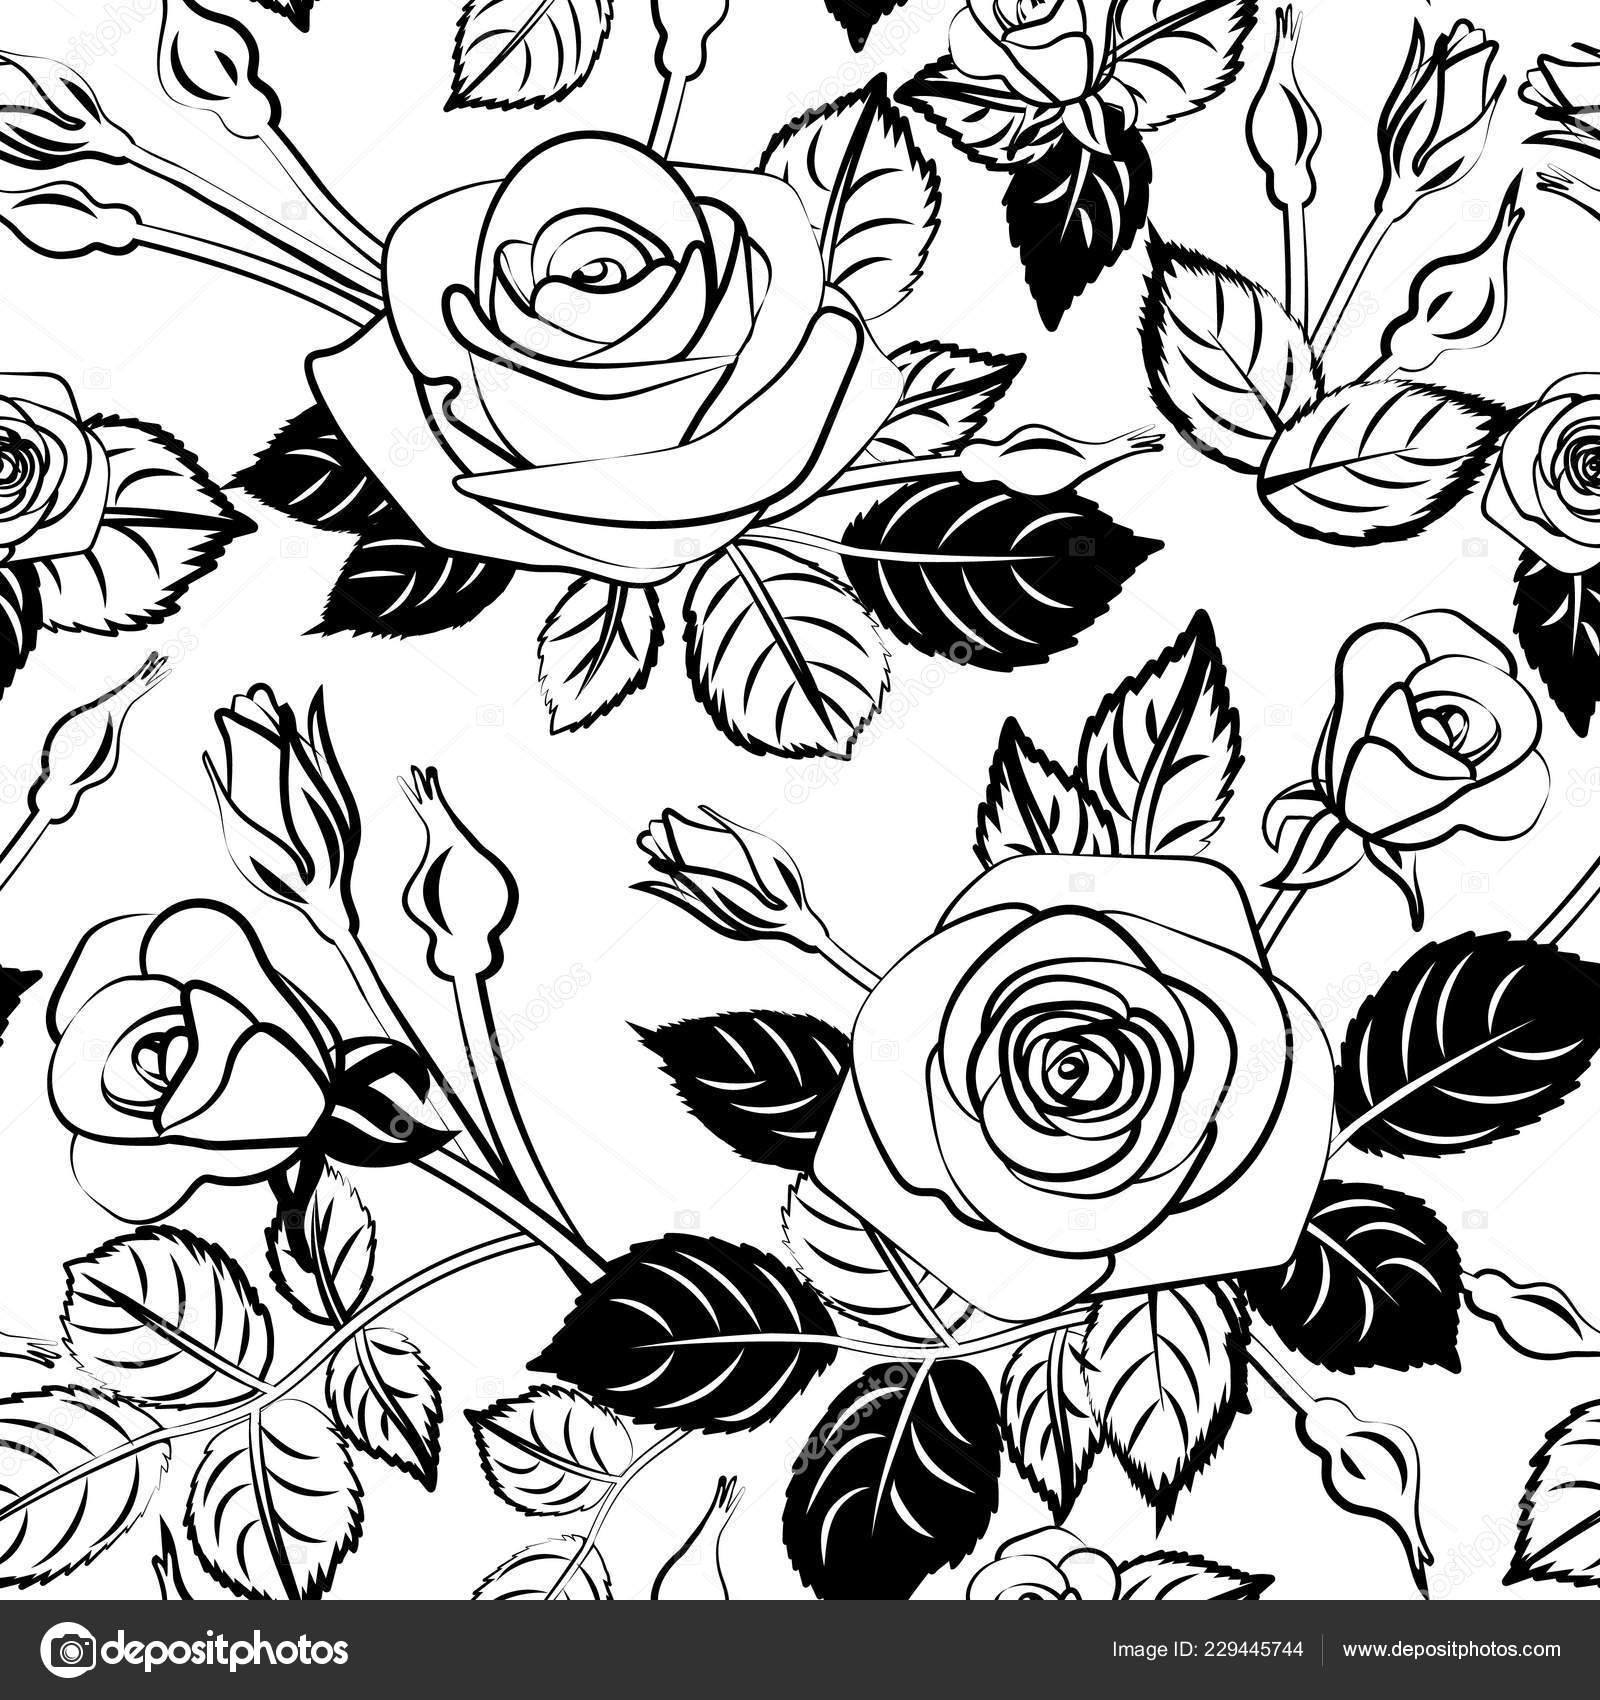 Monochrome seamless floral pattern with flowers rose, buds and